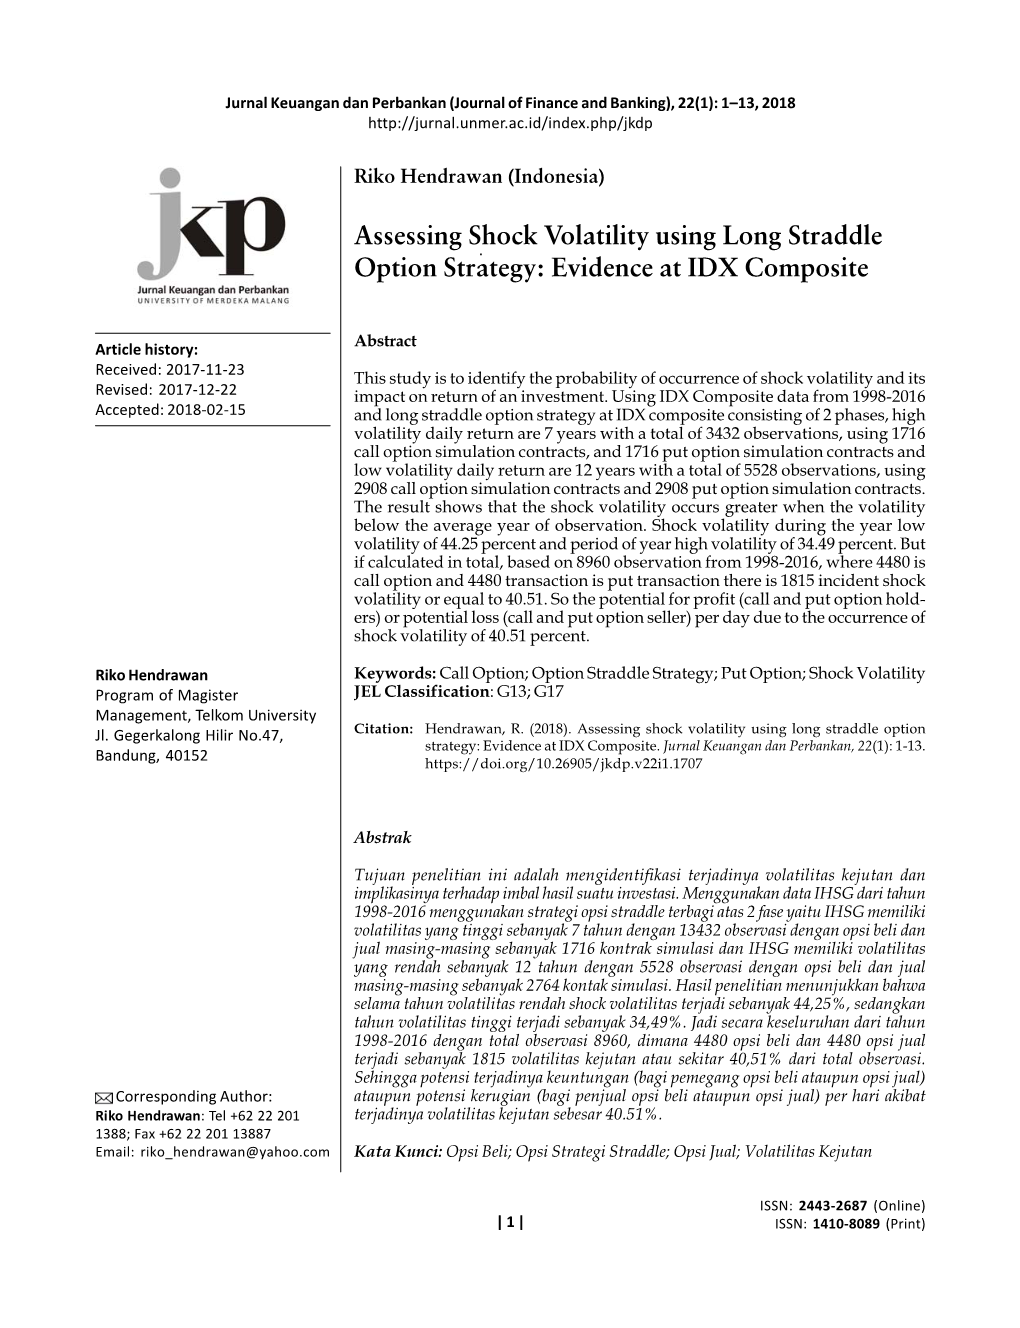 Assessing Shock Volatility Using Long Straddle Option Strategy: Evidence at IDX Composite